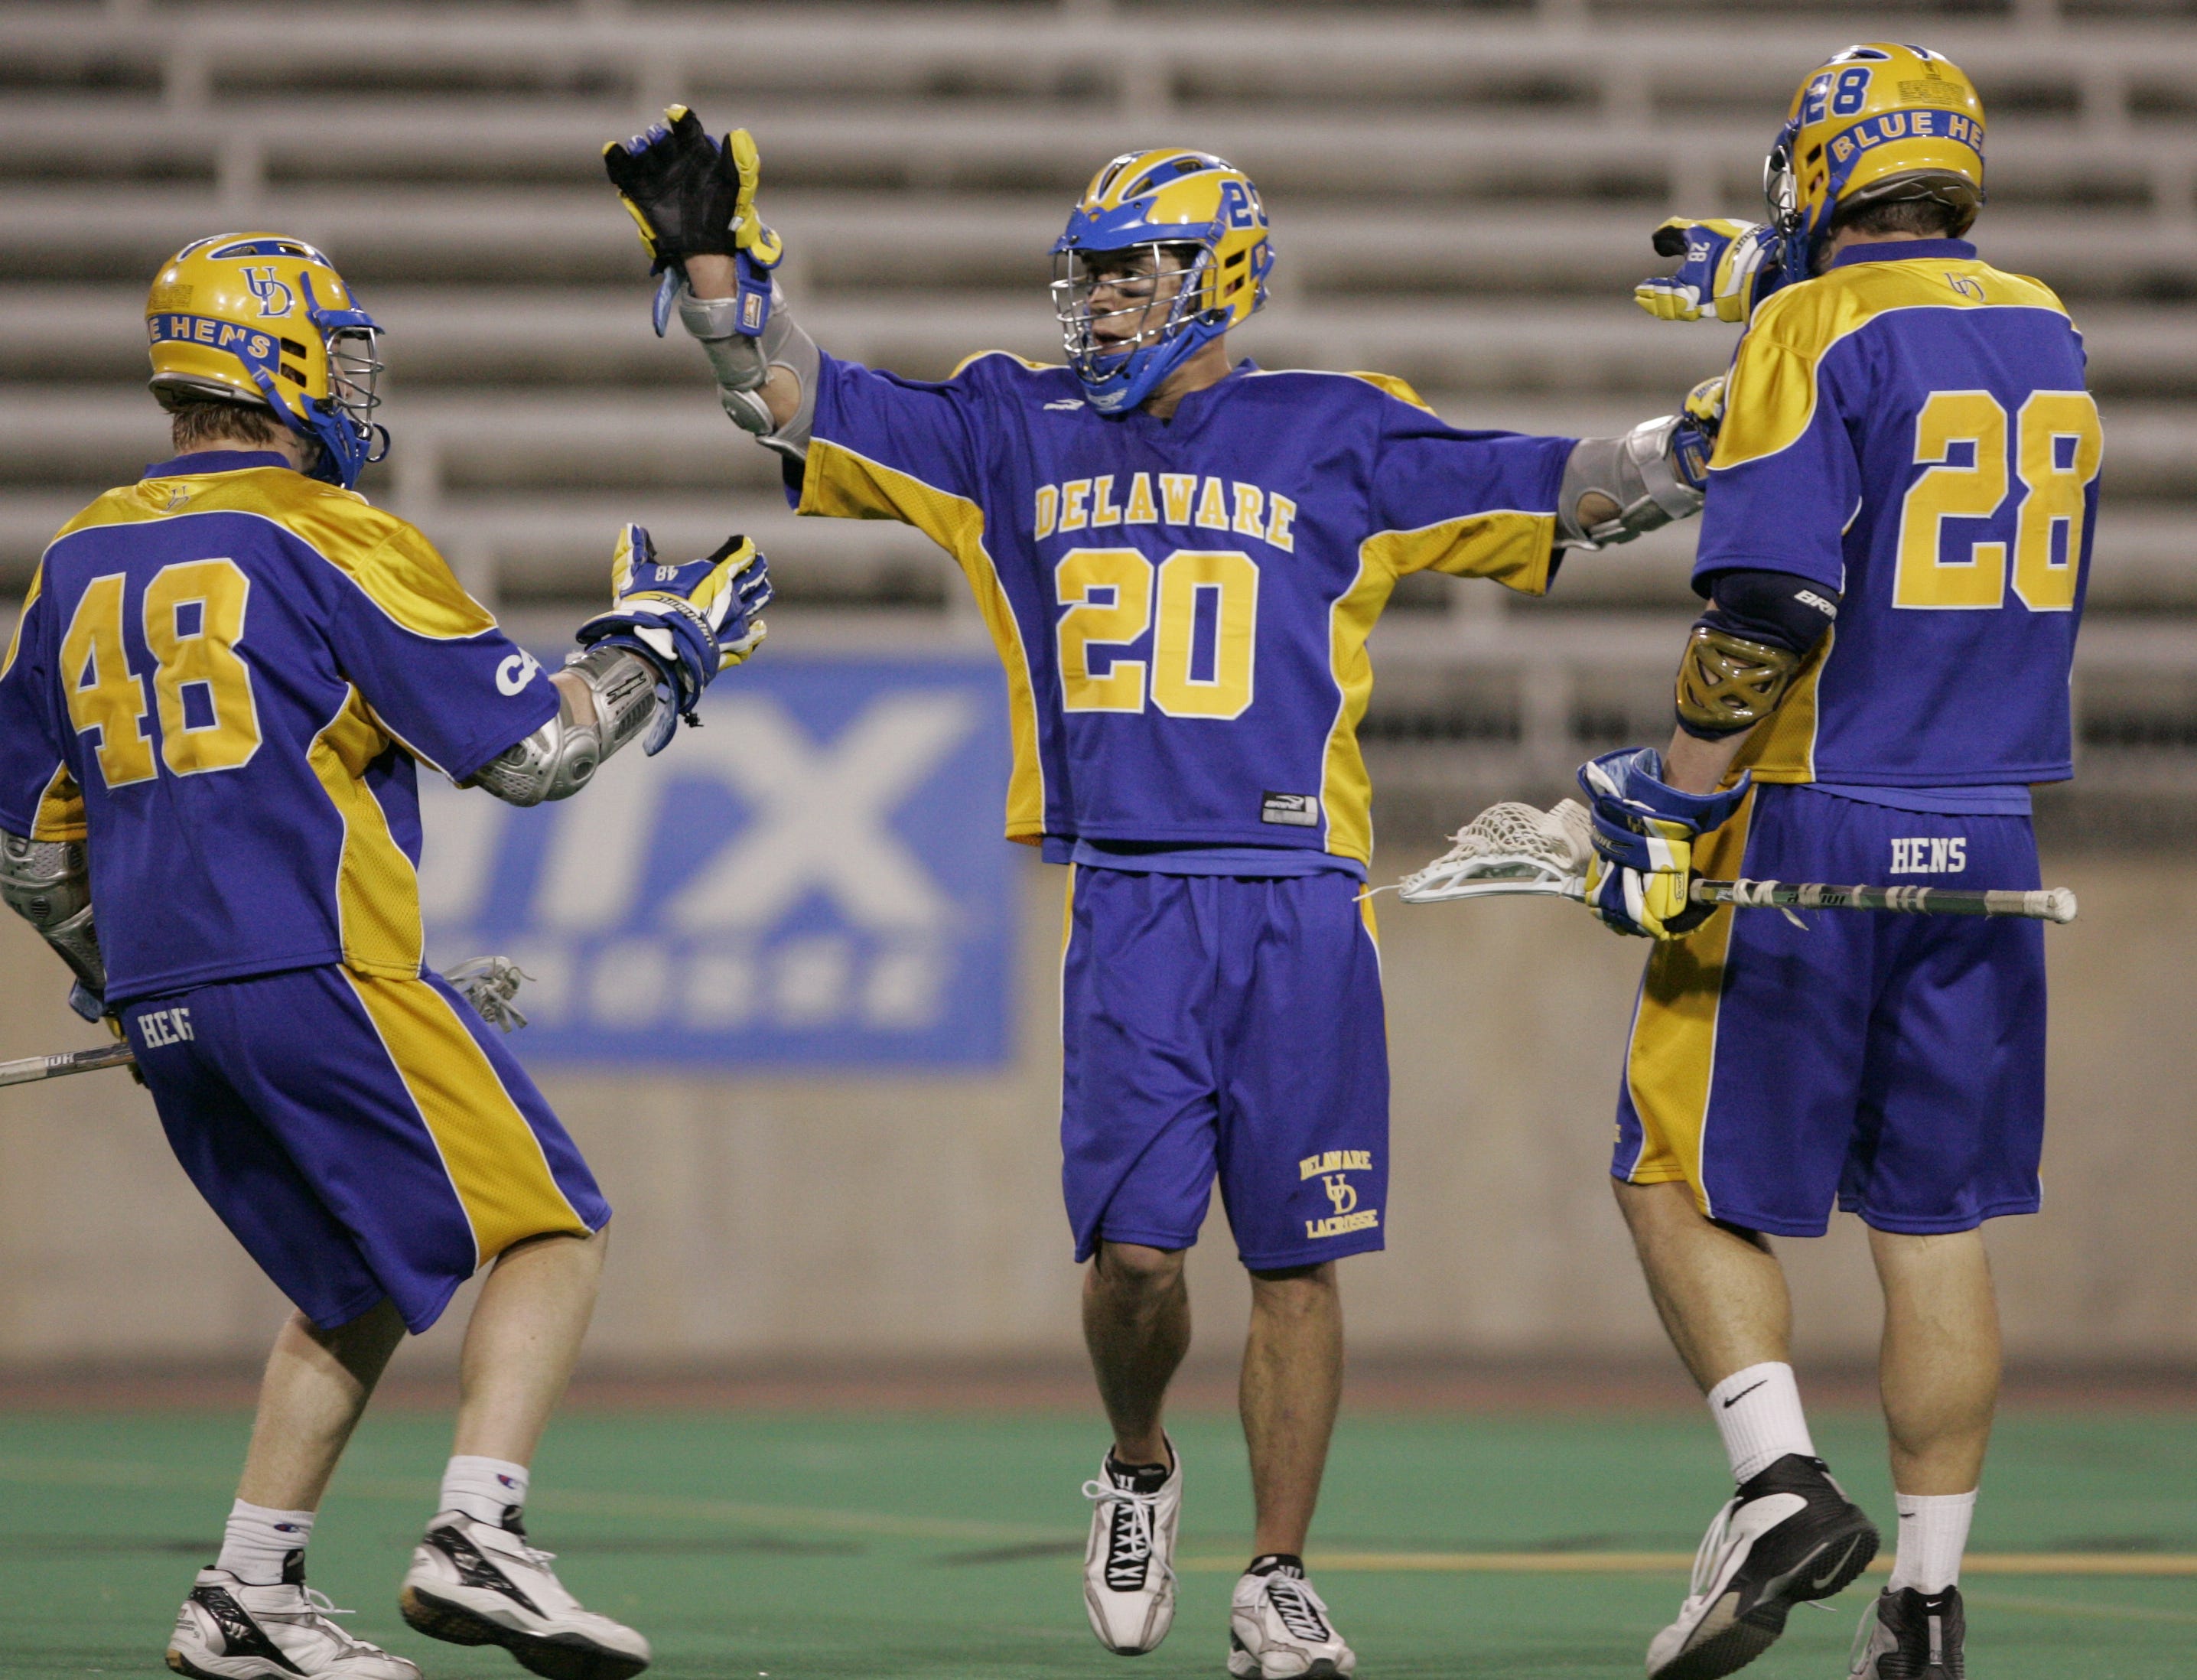 The University of Delaware's Jordan Hall (20) celebrates his fourth quarter goal with teammates Curtis Dickson (48) and J.J. Moran in the Blue Hens' Colonial Athletic Association title game win over Towson, 10-7, at Johnny Unitas Stadium in Towson, Maryland, Saturday, May 5, 2007.